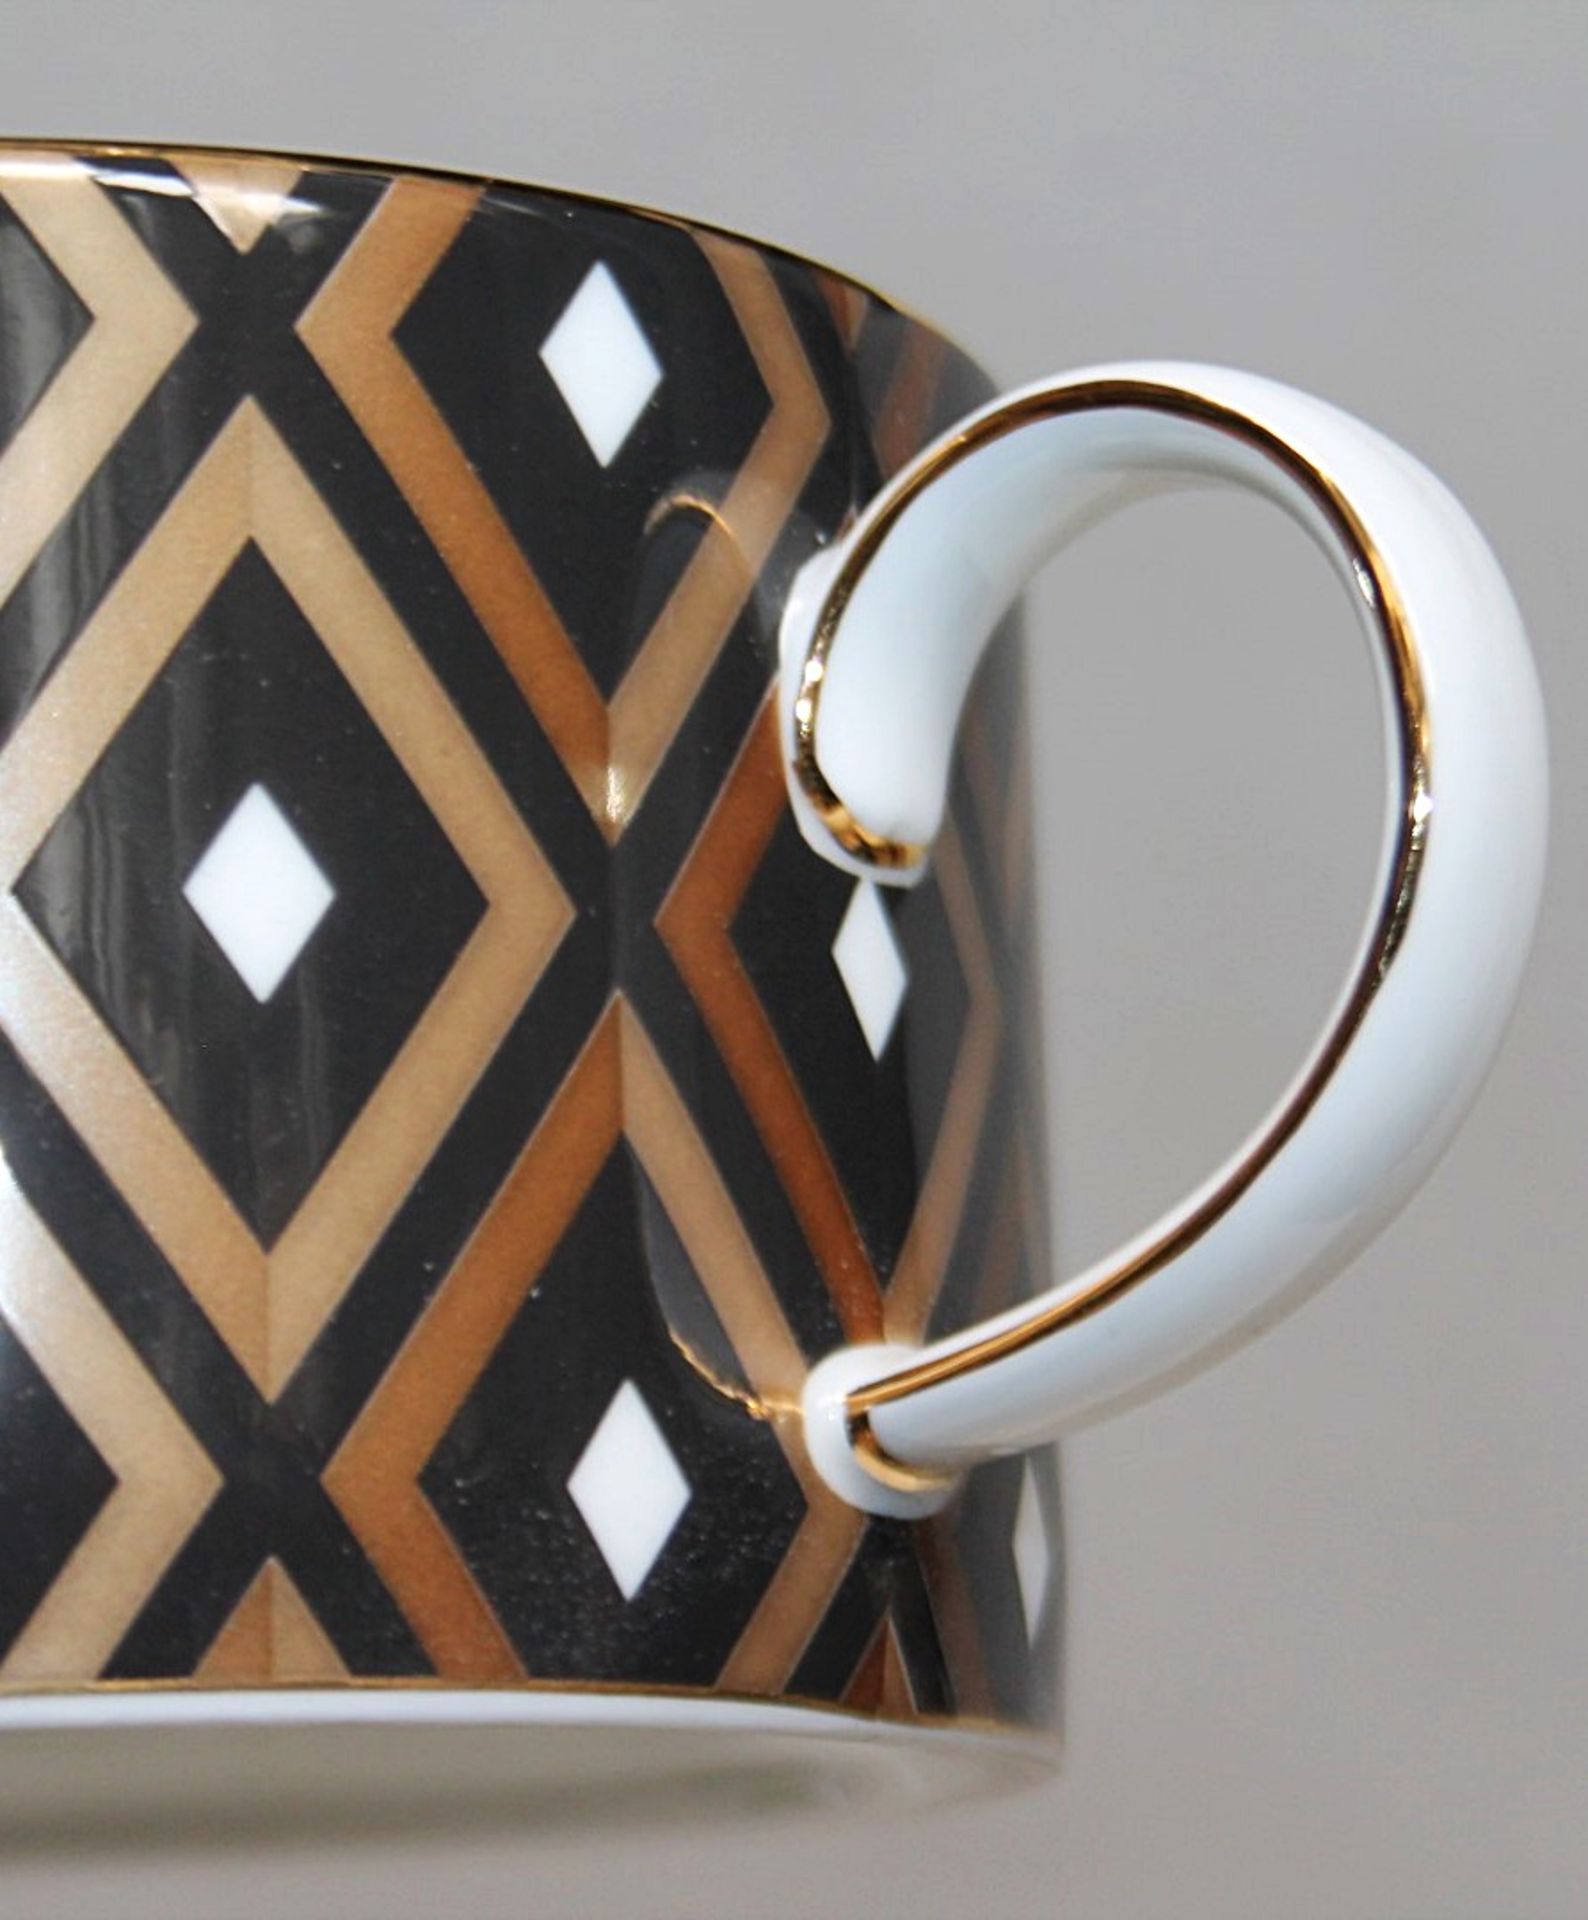 1 x WEDGWOOD 'Arris' Fine Bone China Teacup and Saucer, With An Art Deco Geometric print - Boxed - Image 4 of 6